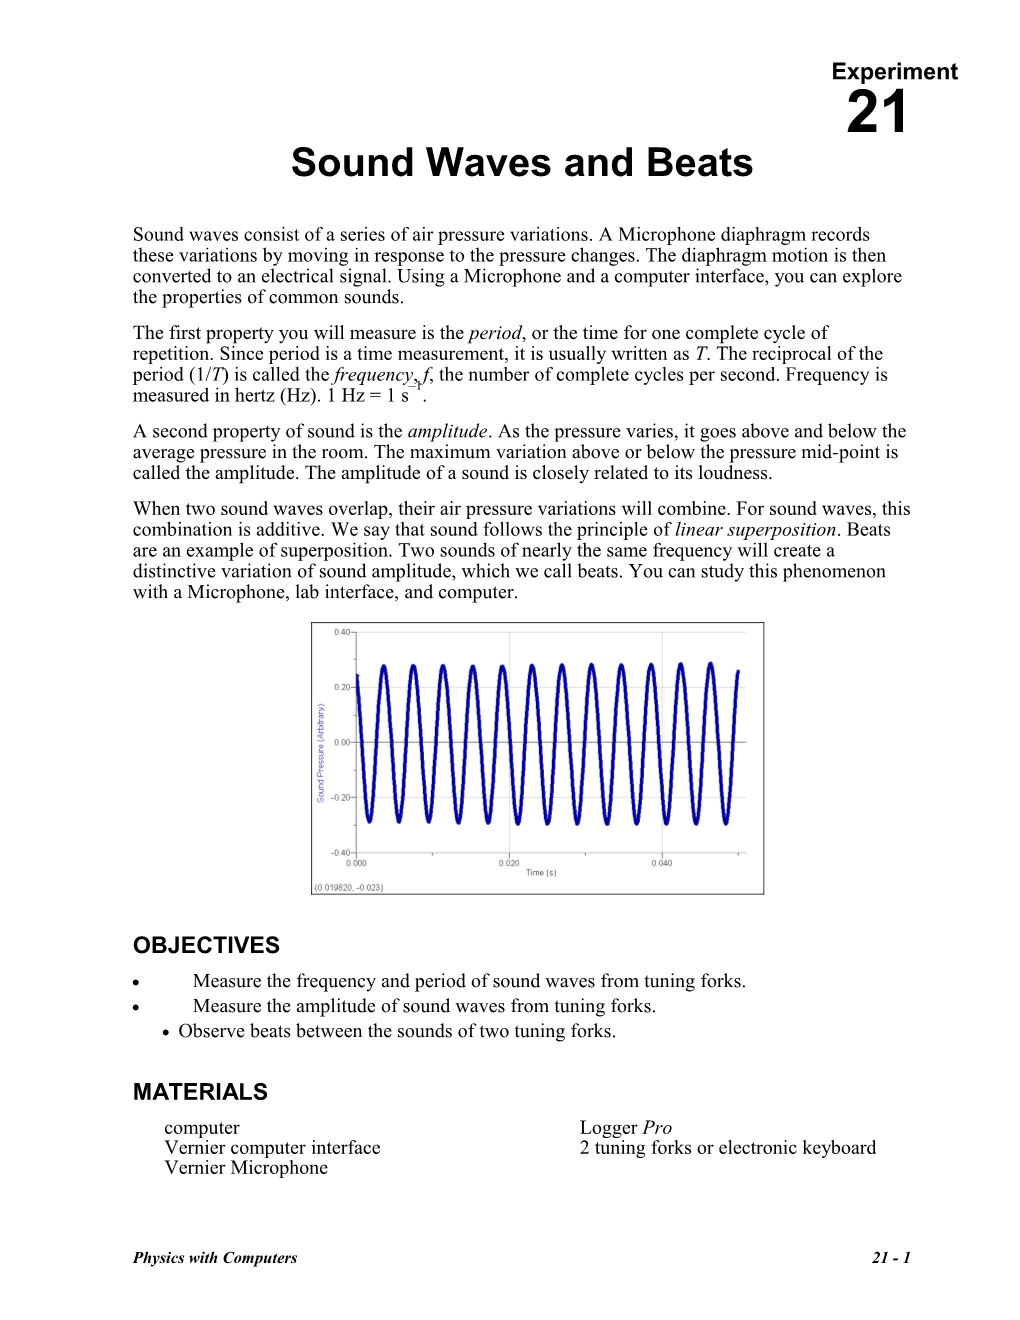 Sound Waves and Beats